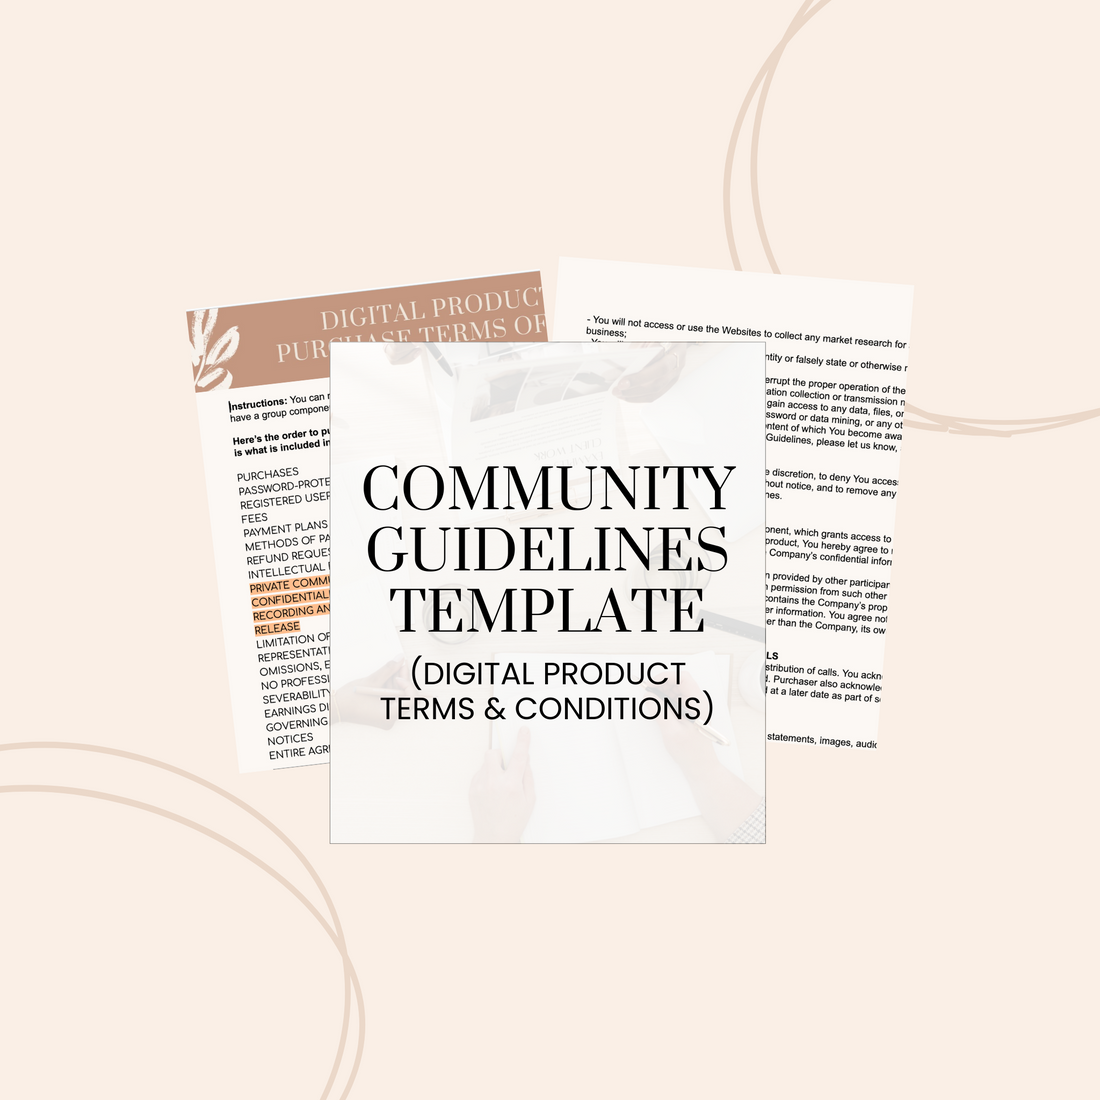 Community Guidelines Template (Digital Product Terms &amp; Conditions)